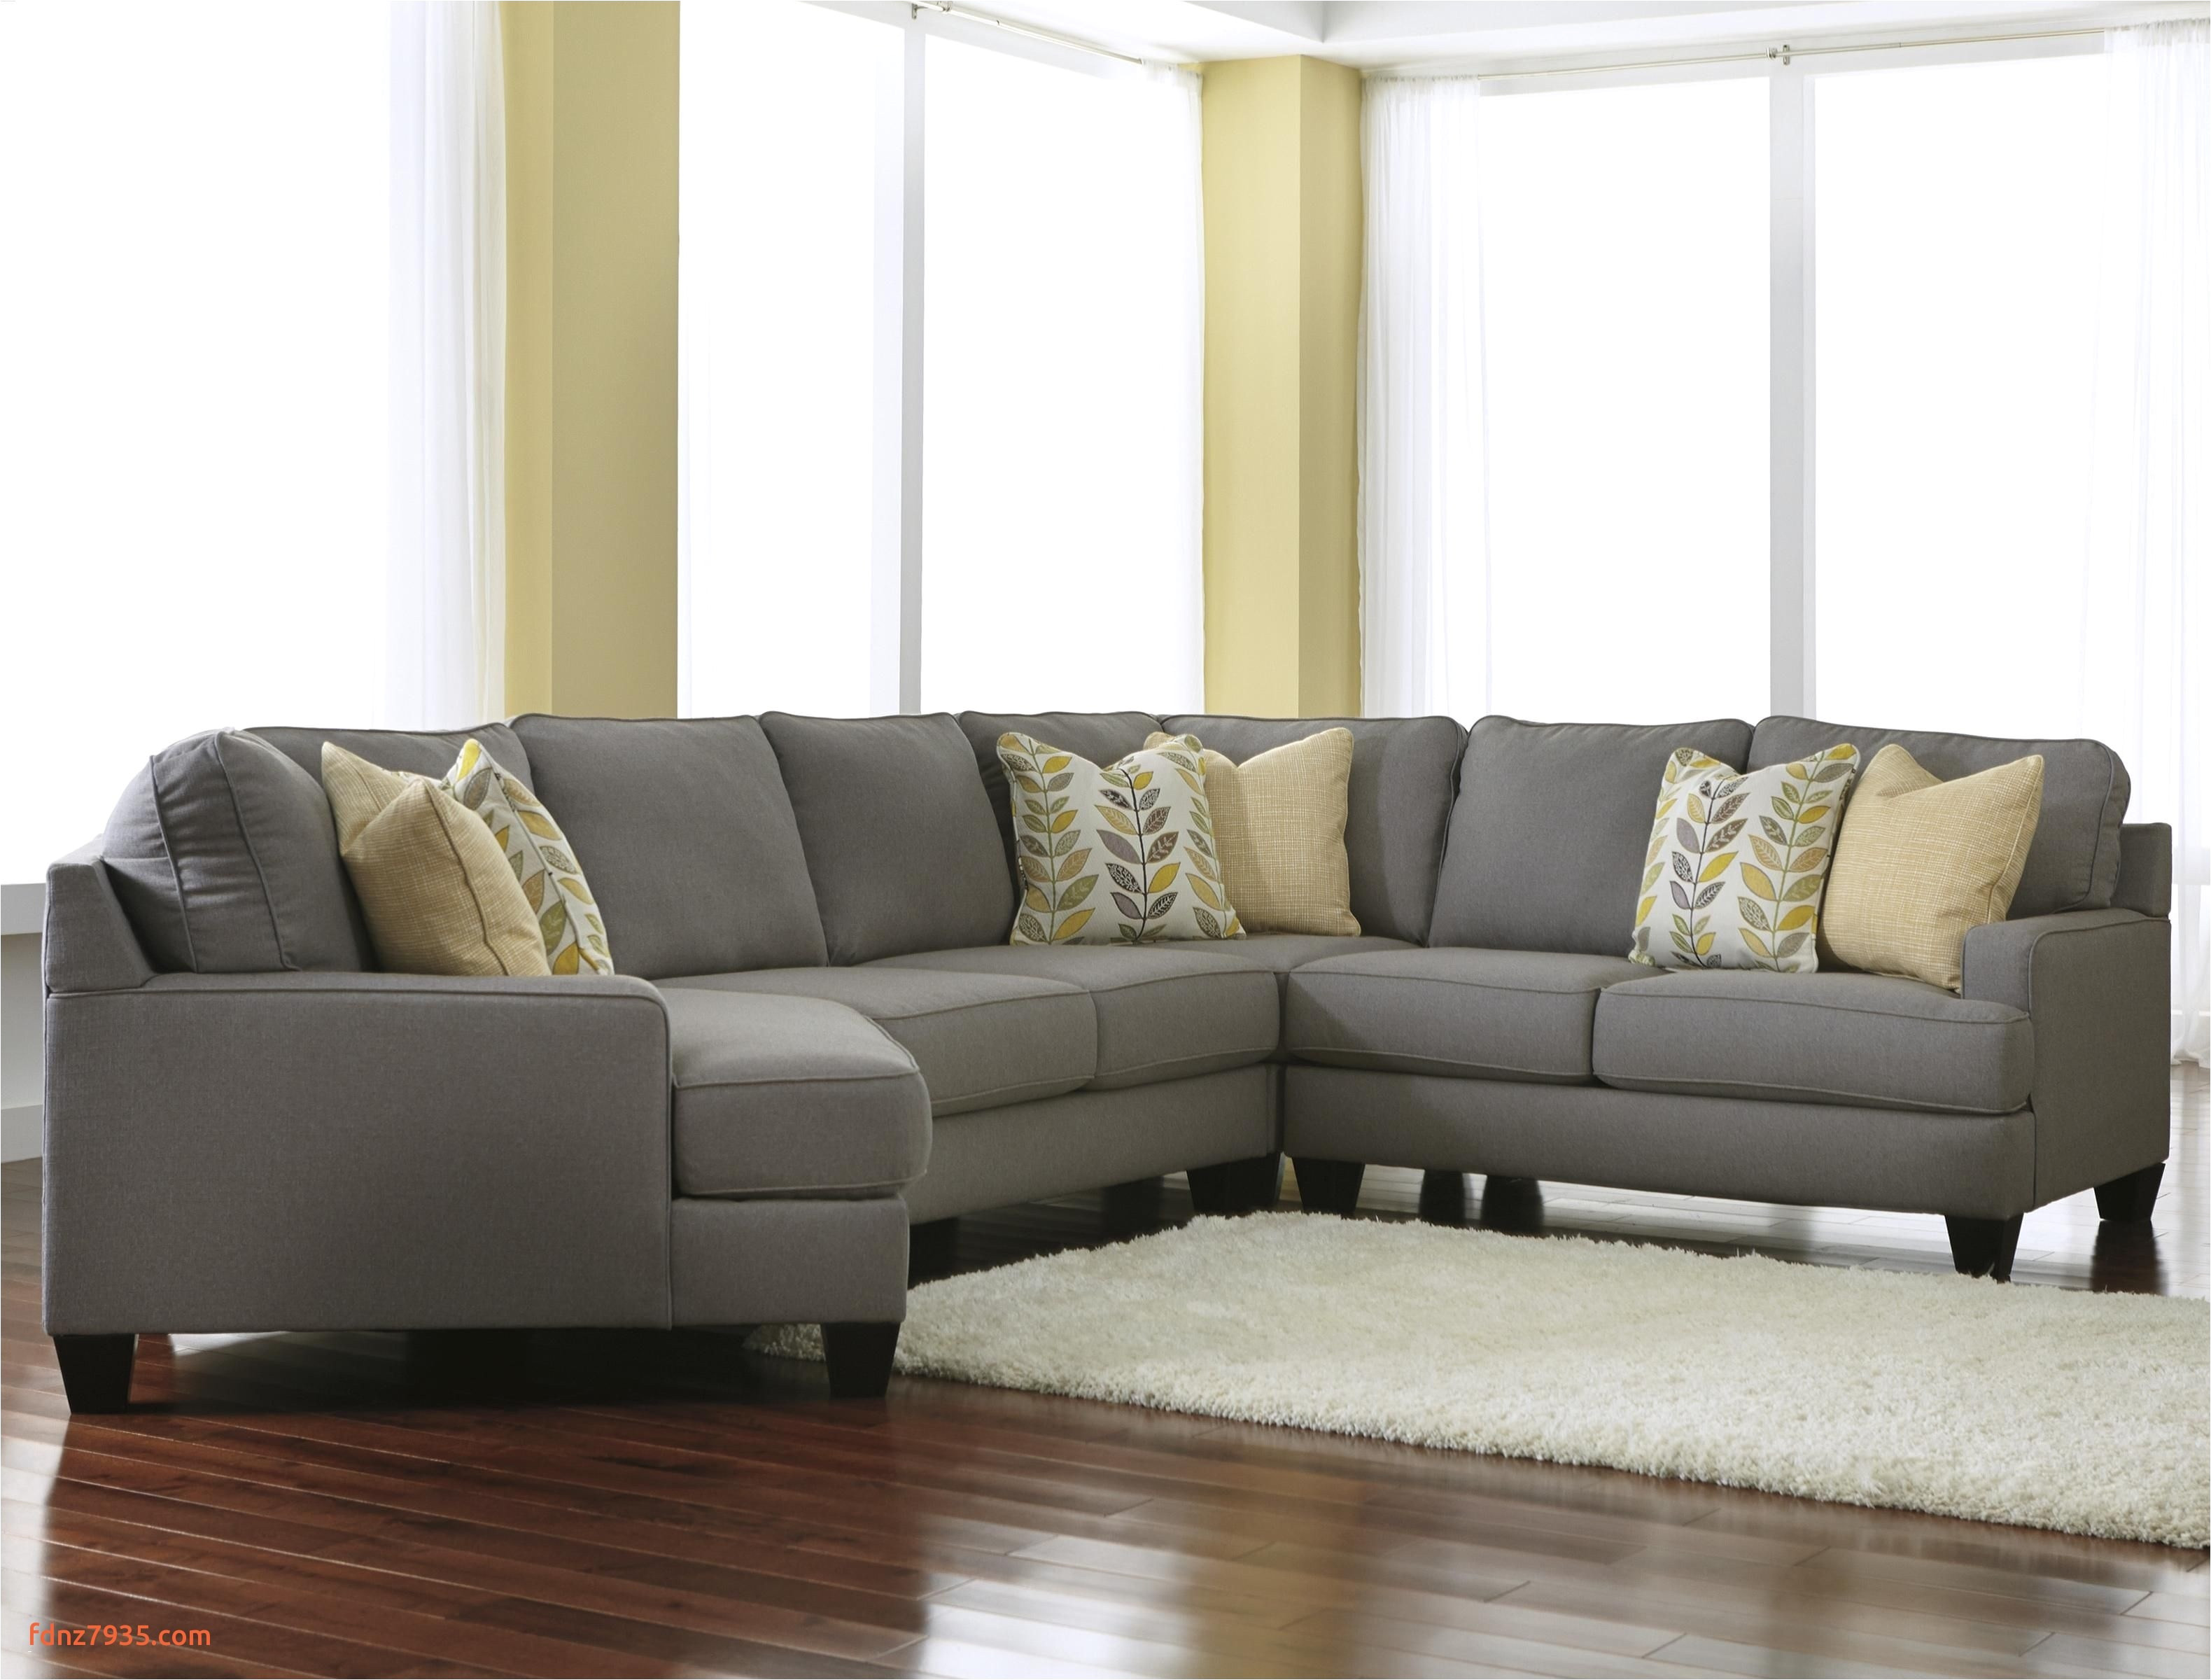 deep seated sectional sofa luxury chamberly alloy modern 4 piece sectional sofa with left cuddler